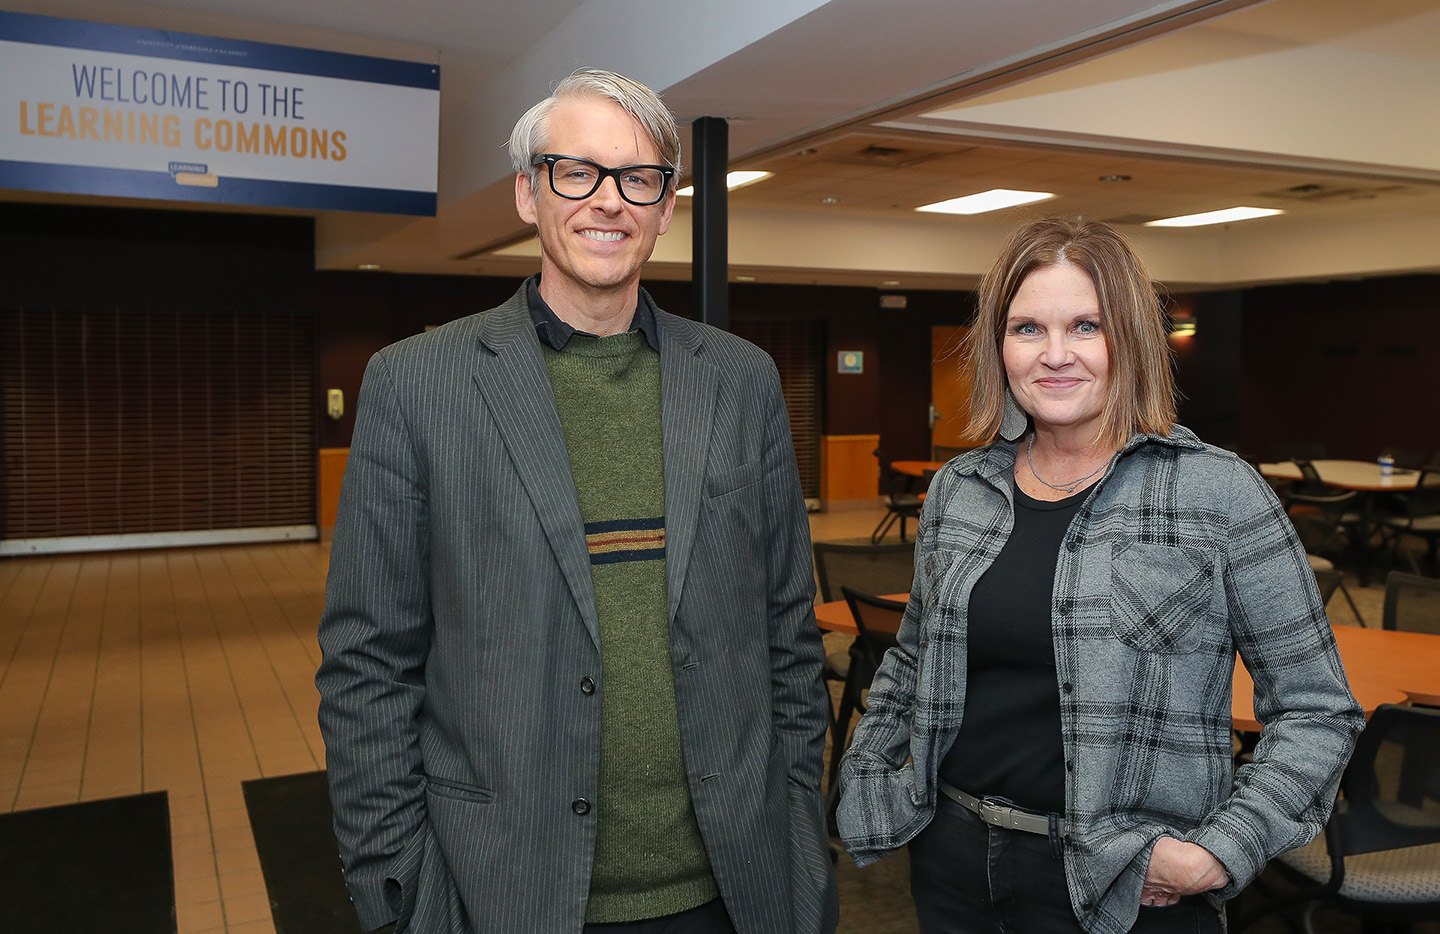 Patrick Hargon, director of the UNK Learning Commons, and student success coordinator Julie Everett pose for a photo at the office’s temporary location inside University Residence North. When the Calvin T. Ryan Library renovation is complete, the Learning Commons will be part of the new Loper Success Hub on the second floor.